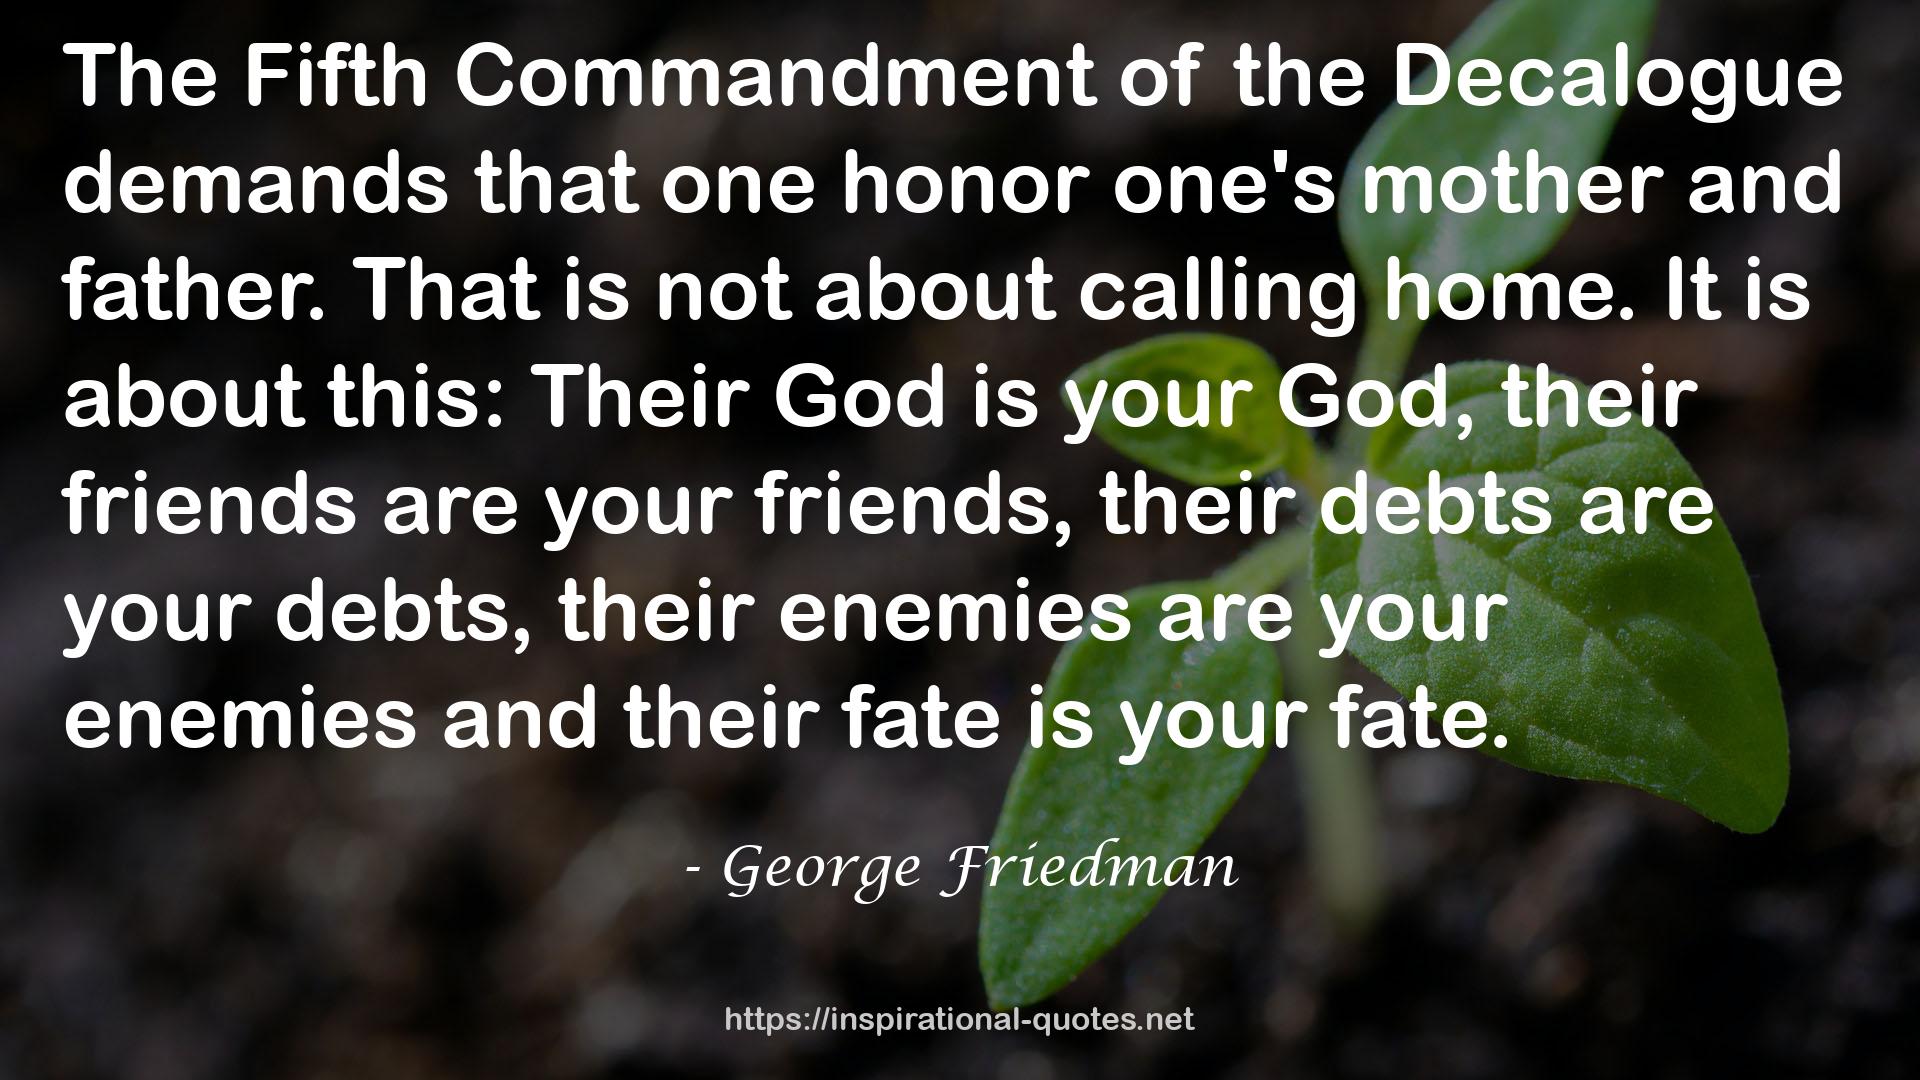 George Friedman QUOTES